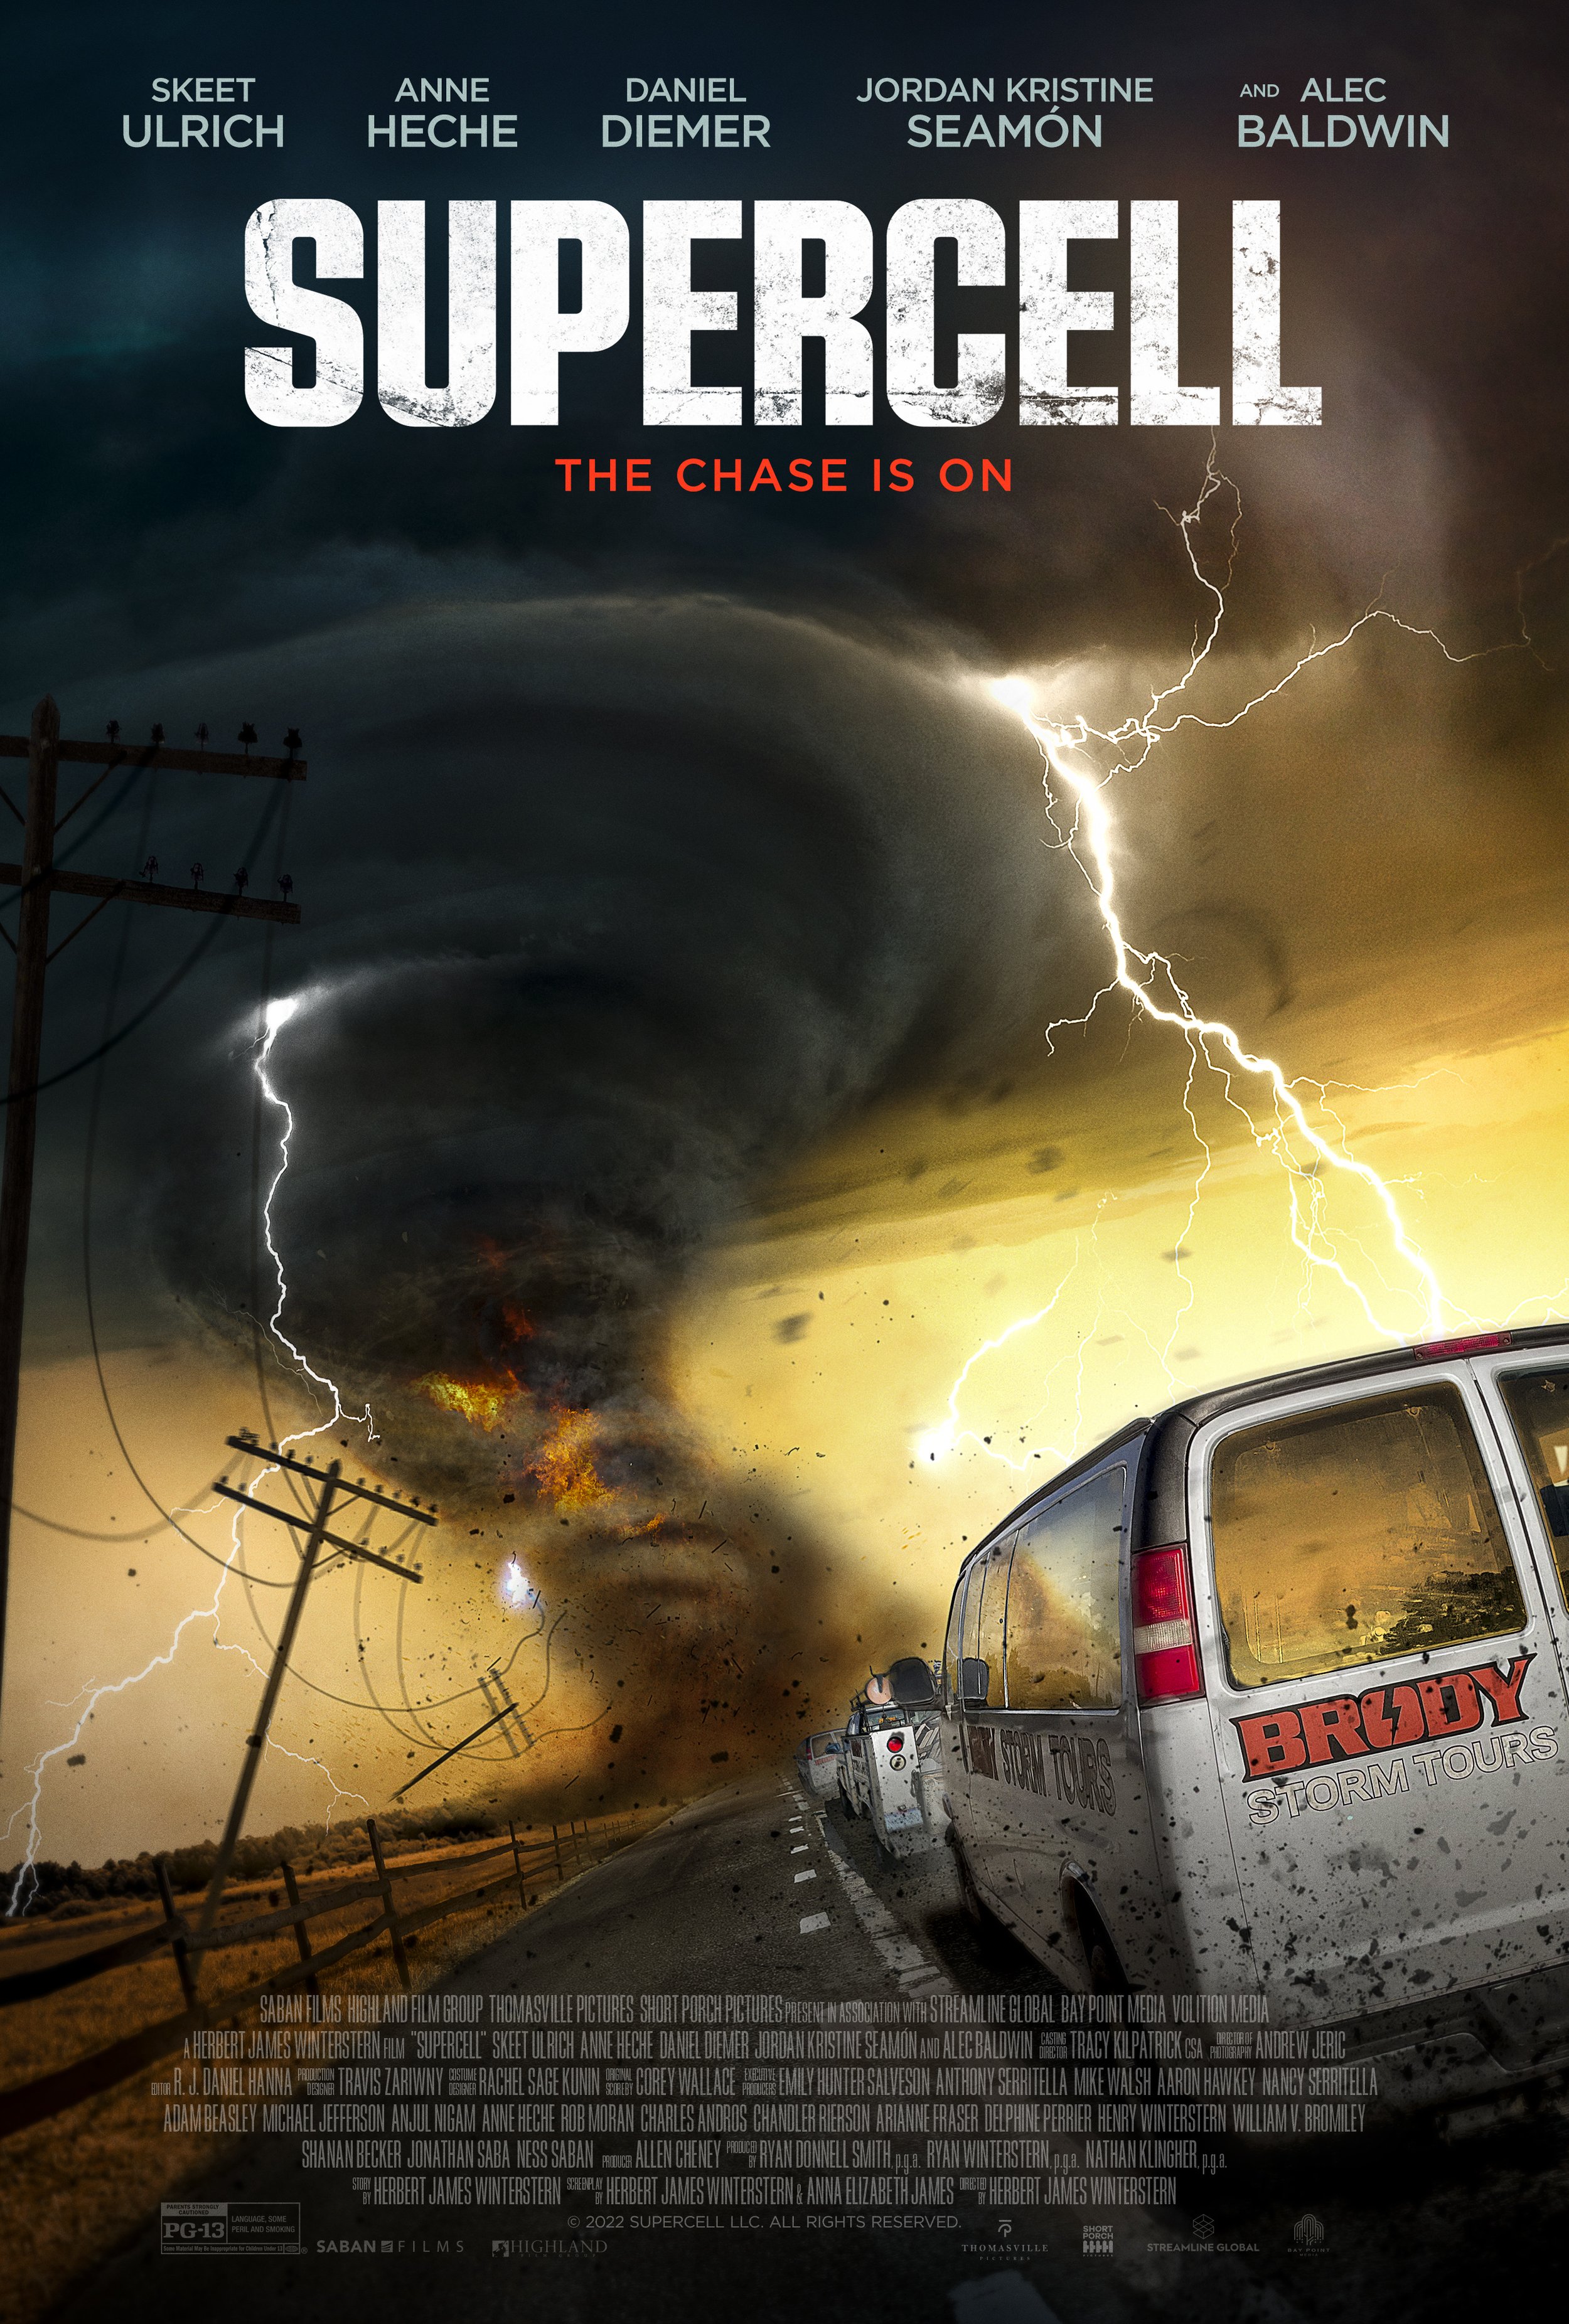 New storm chasing movie “Supercell” to premiere this week in North